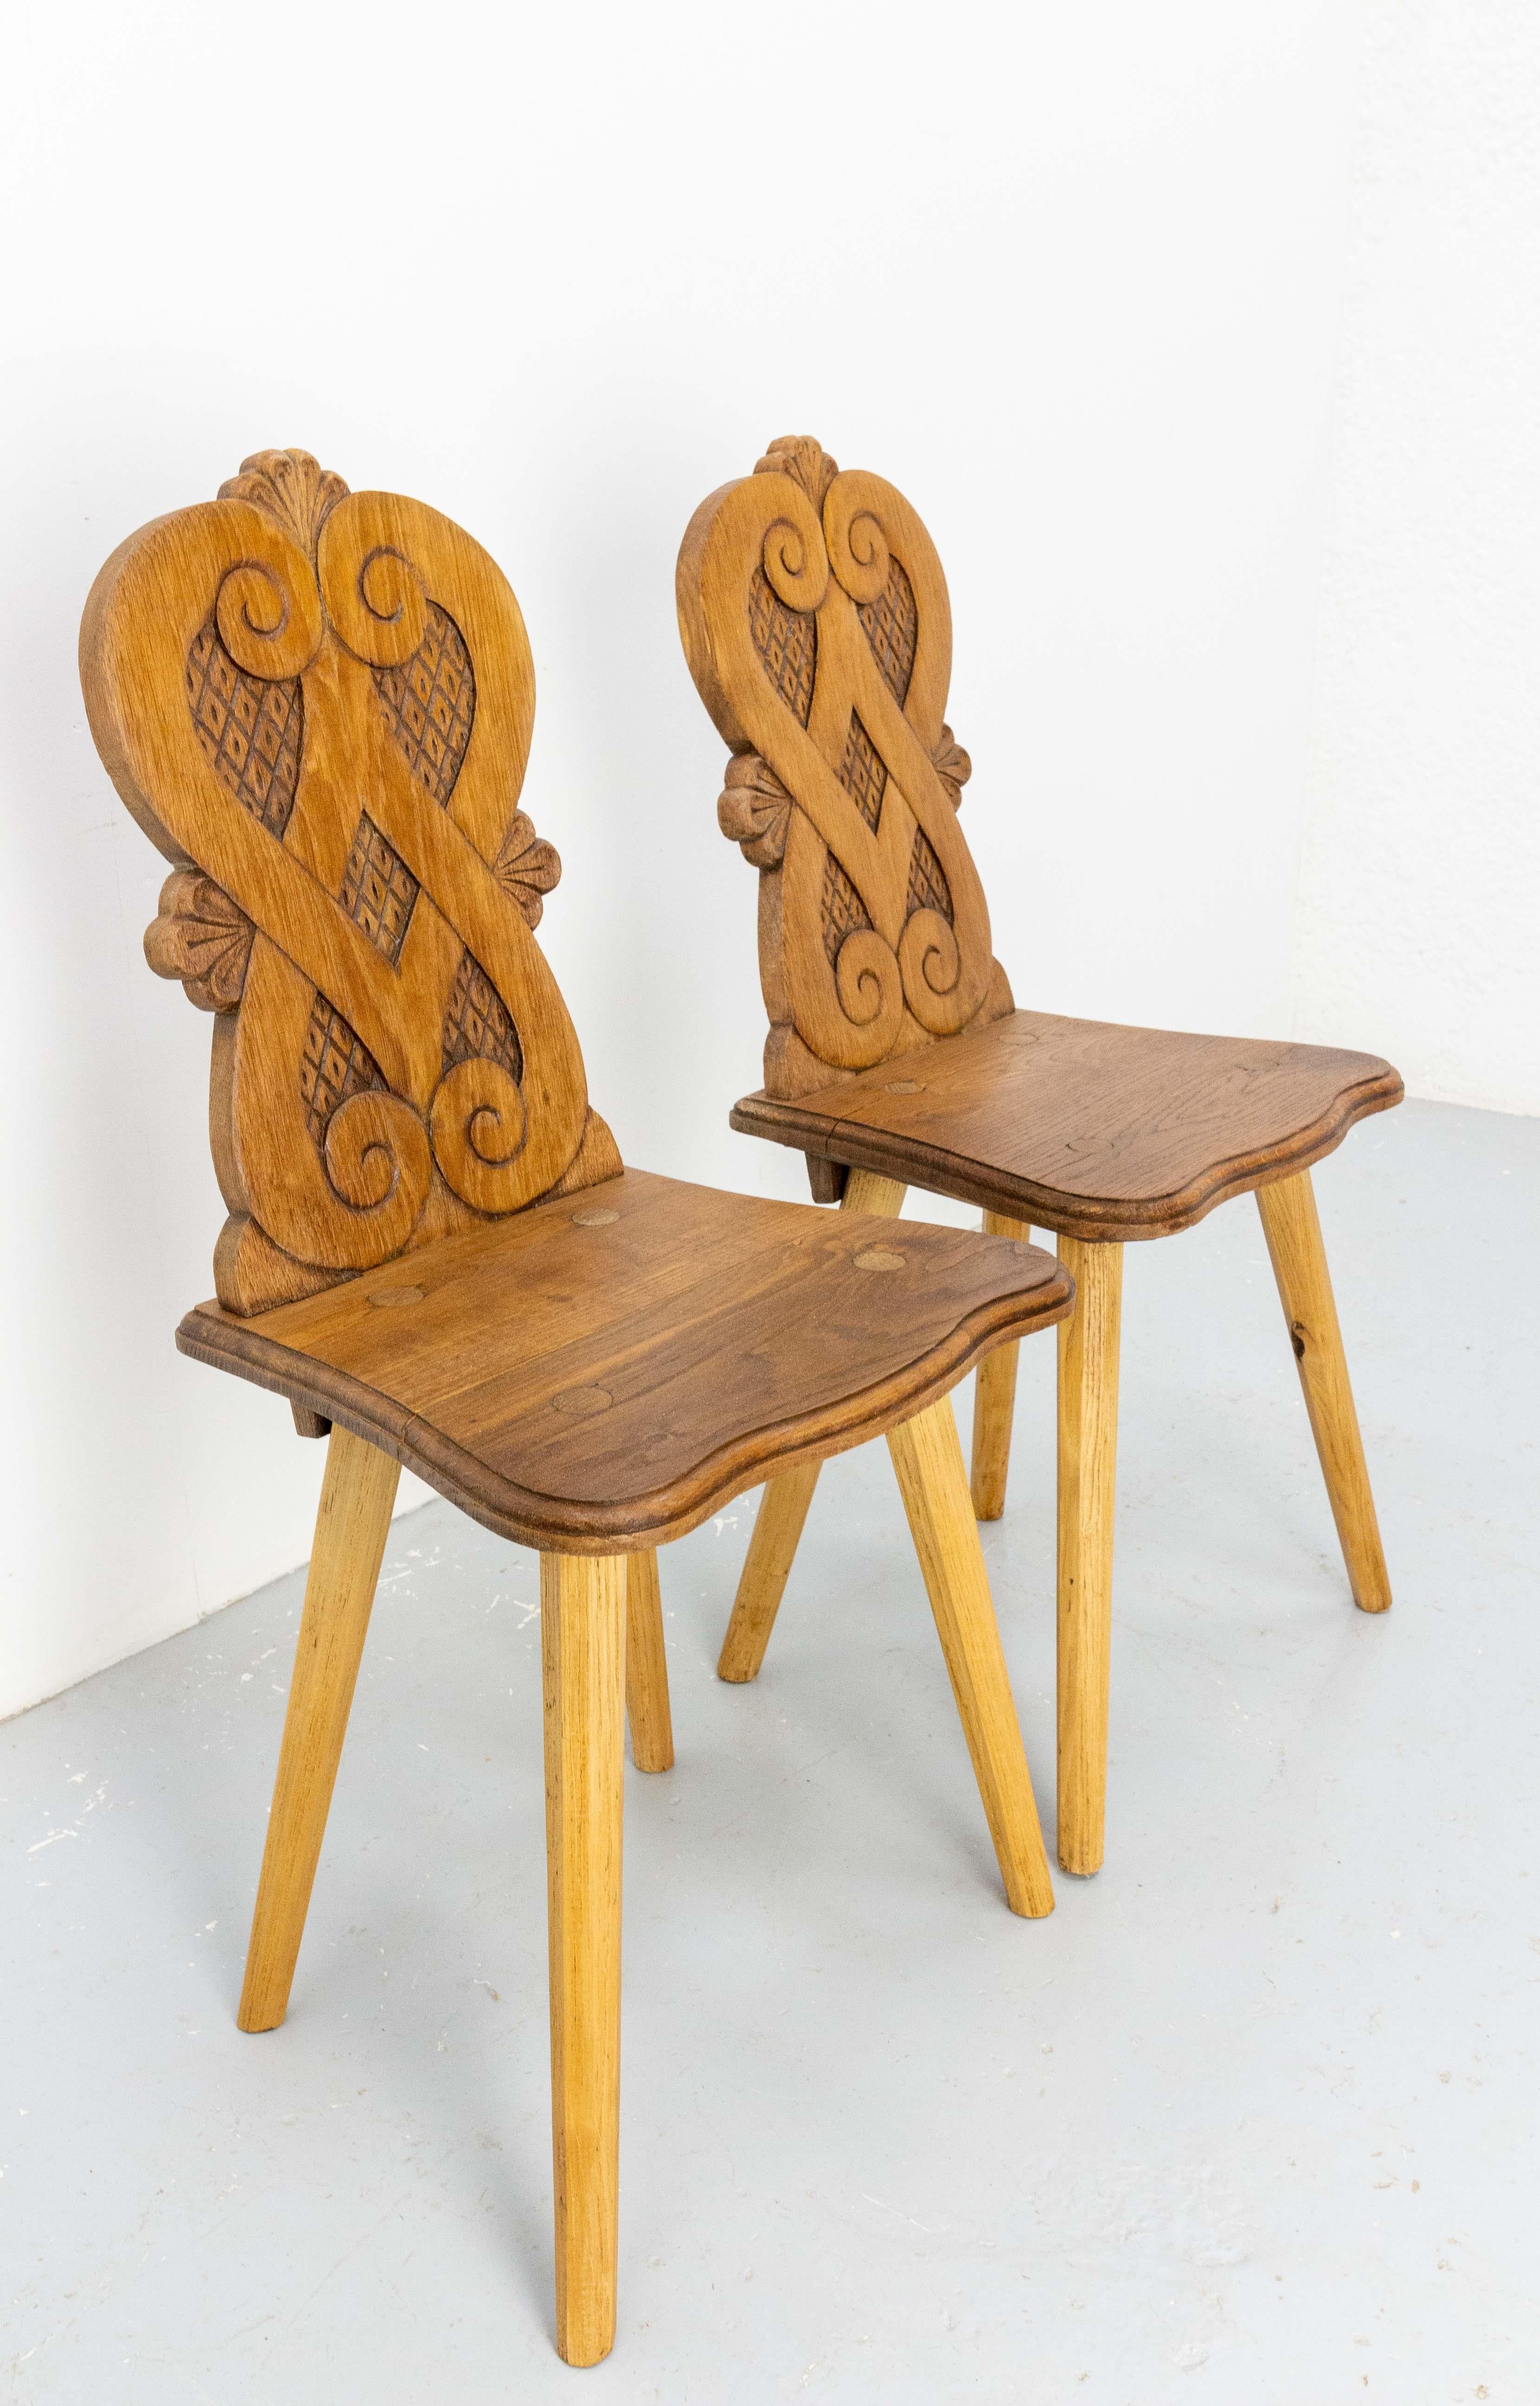 Pair Dining Chairs Swiss Alp Escabelles Oak Brutalist Style, French, Late 19th C In Good Condition For Sale In Labrit, Landes